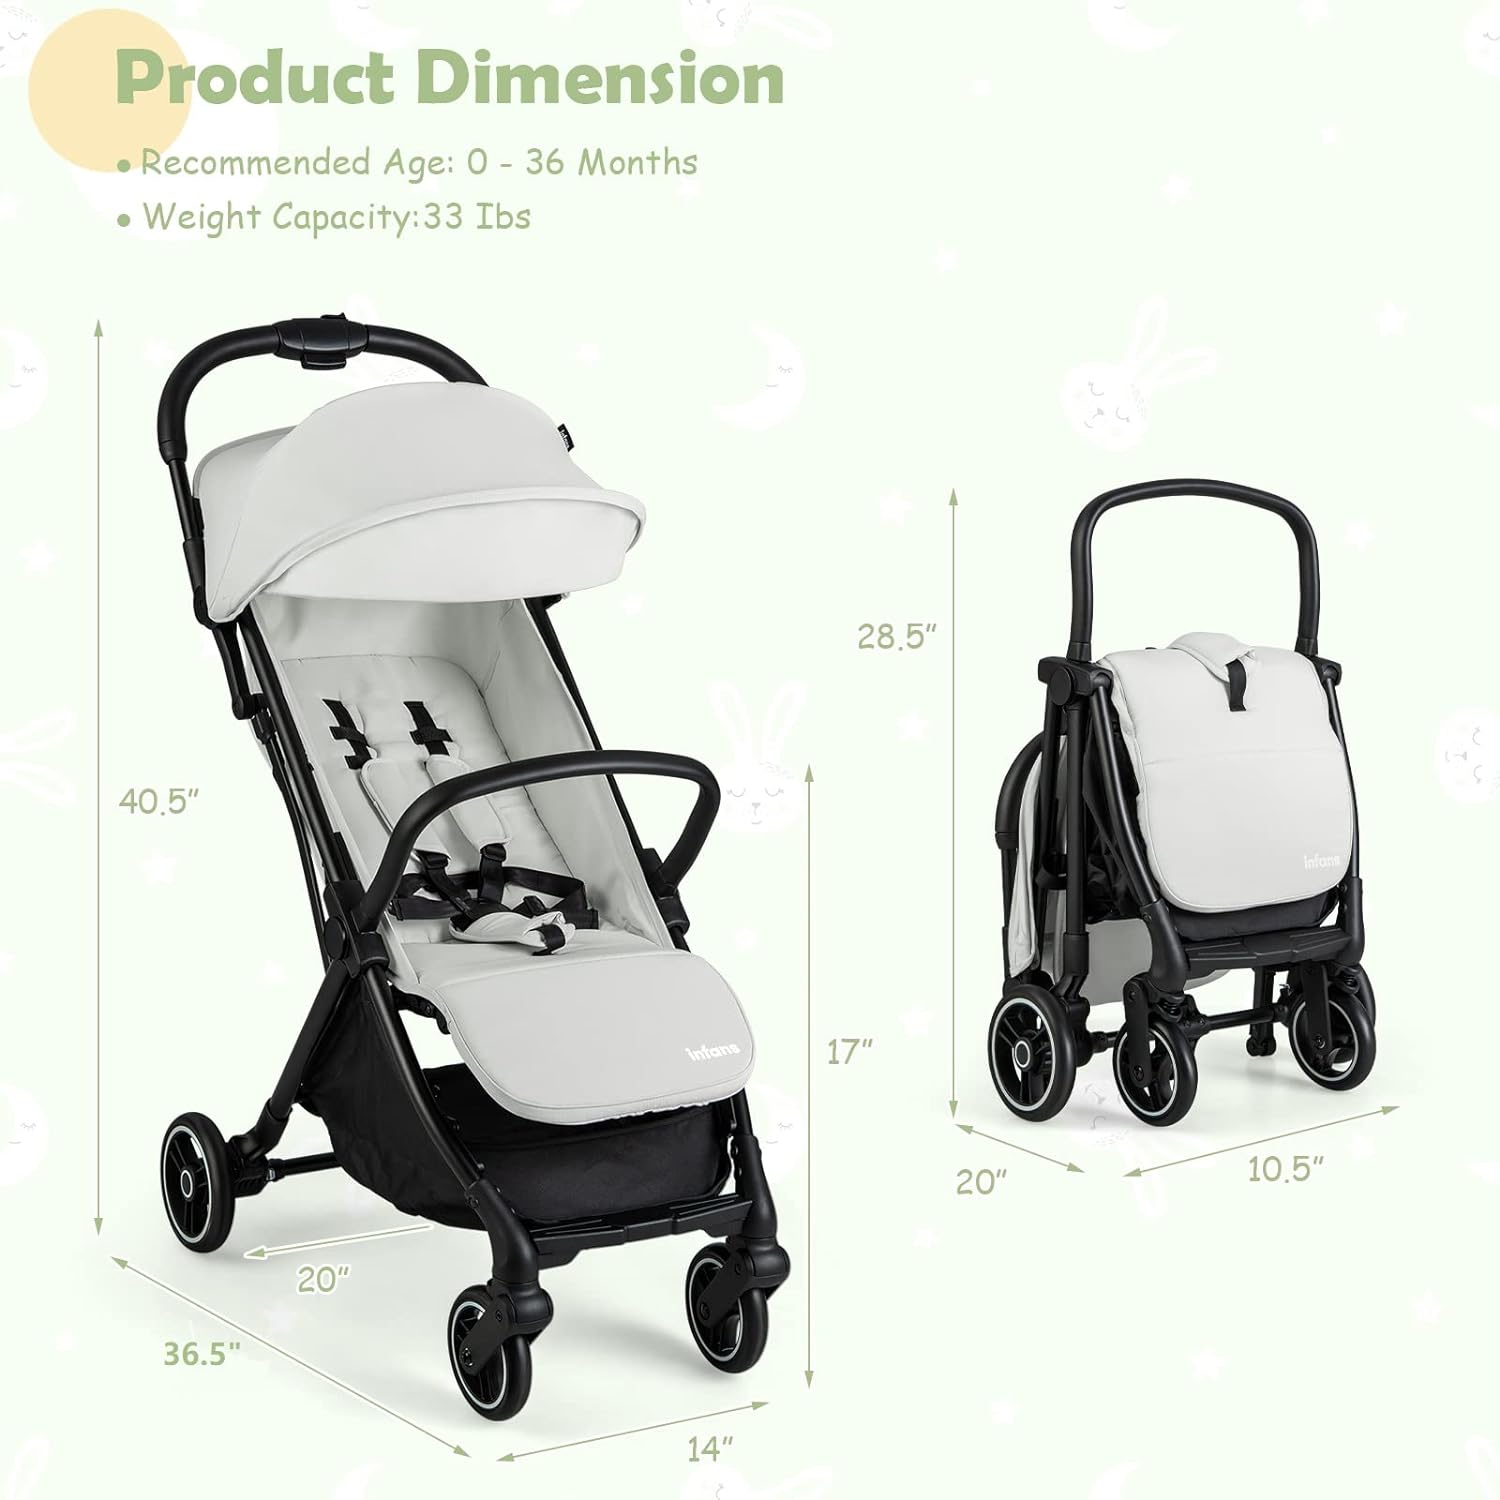 INFANS Lightweight Baby Stroller, One-Hand Gravity Fold, Compact Travel Stroller for Airplane with Aluminium Frame, Adjustable Backrest and Canopy, Foldable Infant Toddler Stroller for 0-36 Month